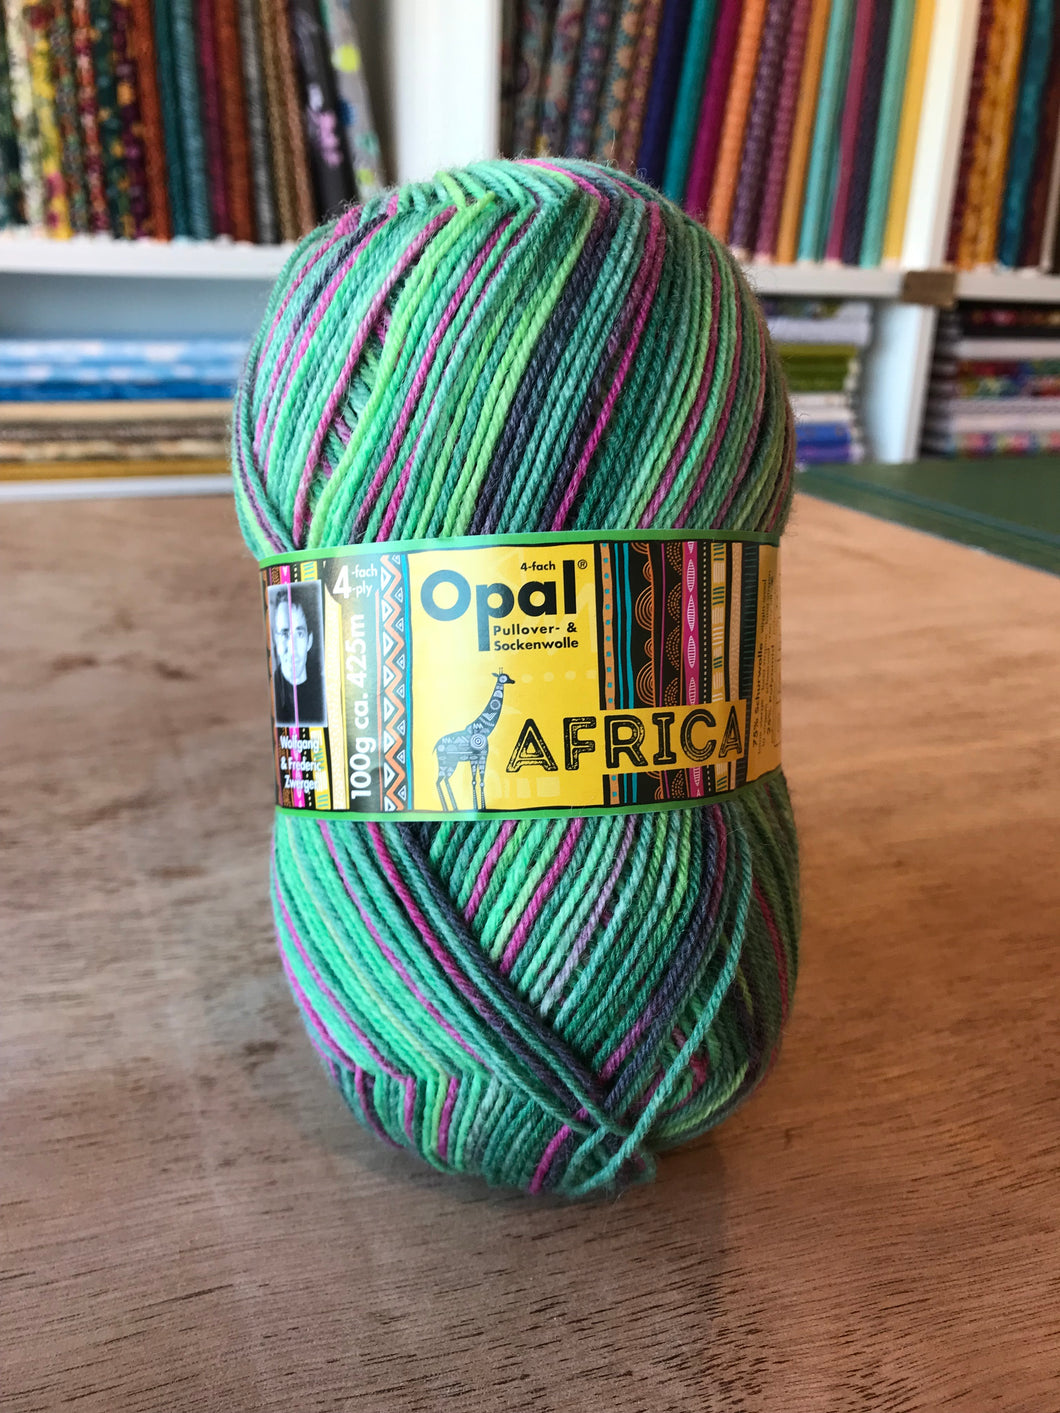 Opal - Africa - 4ply - Shade 11165